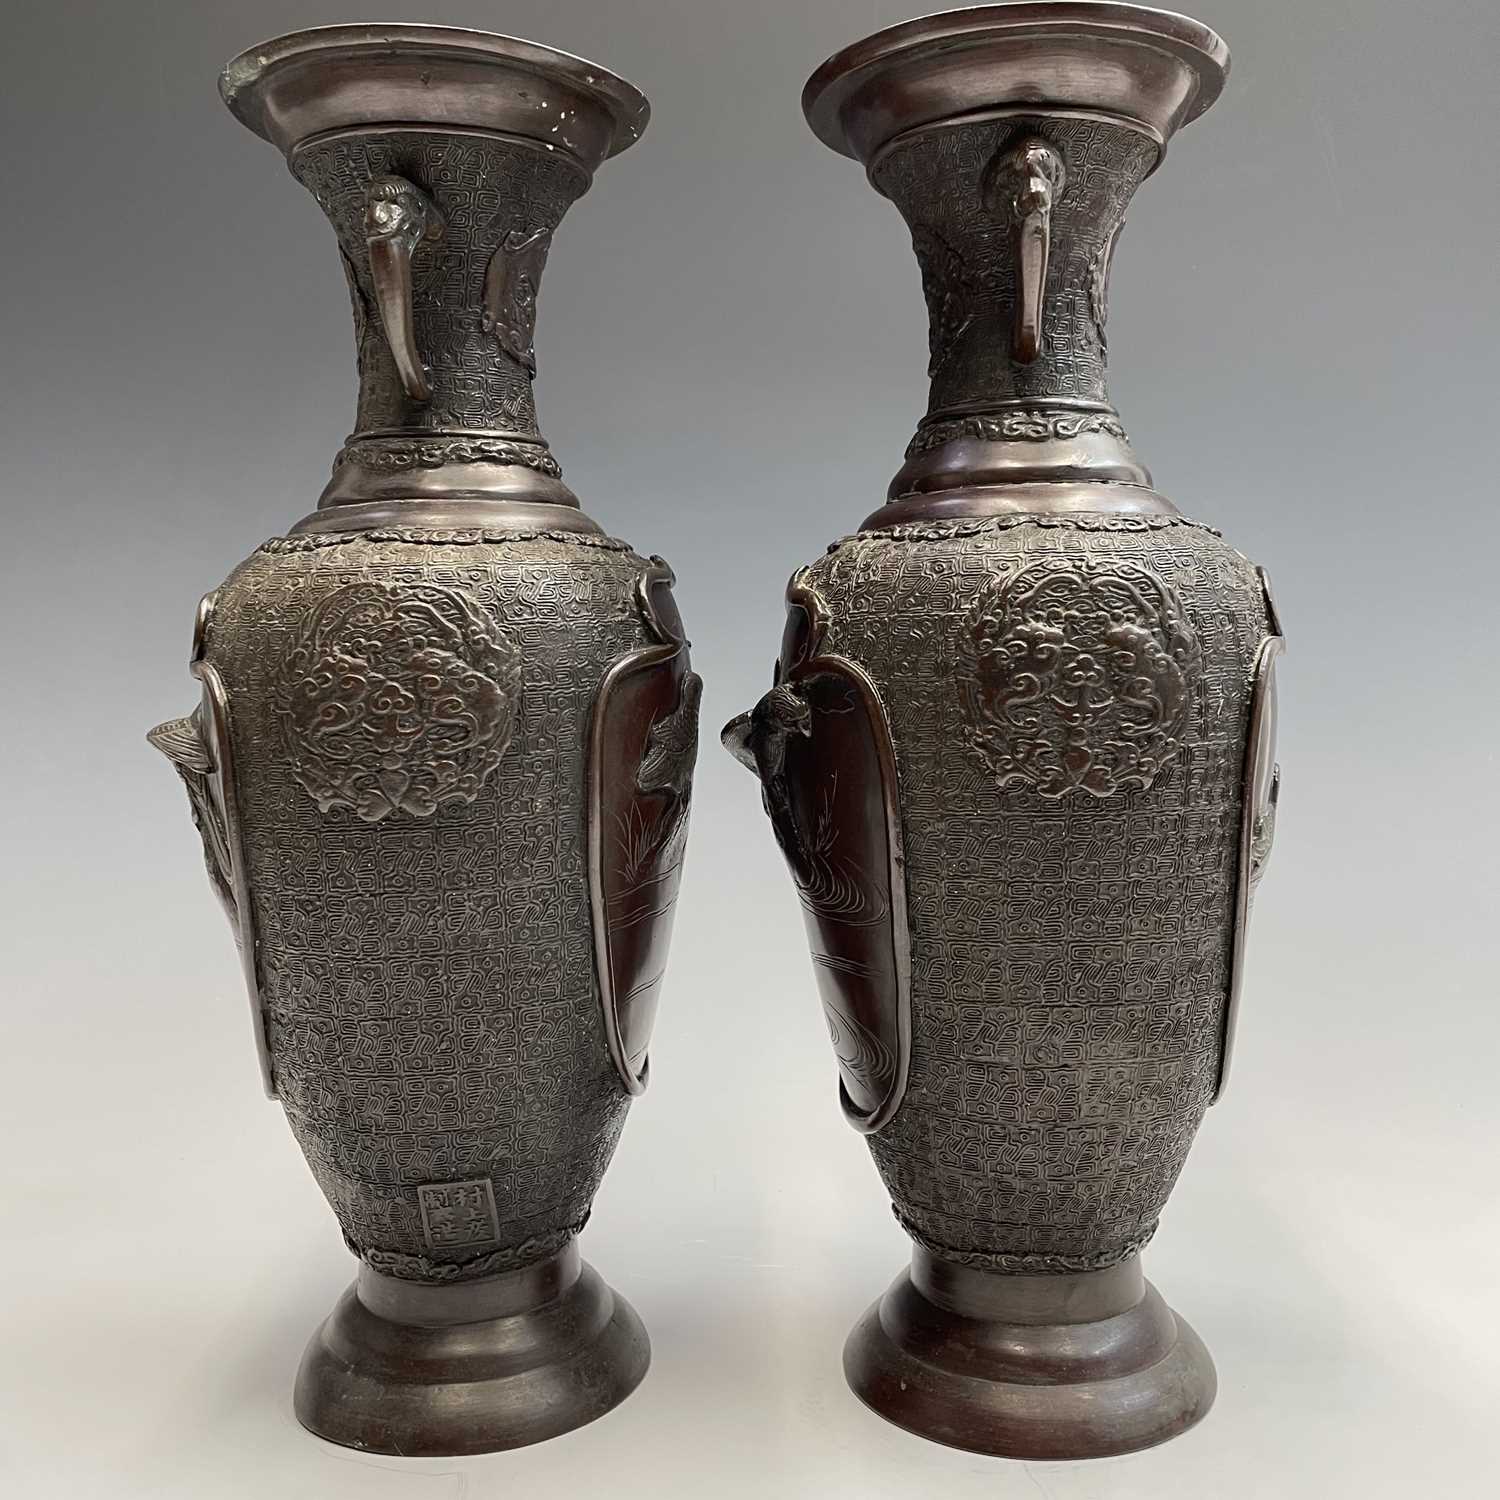 A pair of Japanese bronze twin-handled vases, Meiji period, seal mark, relief decorated with - Image 12 of 12